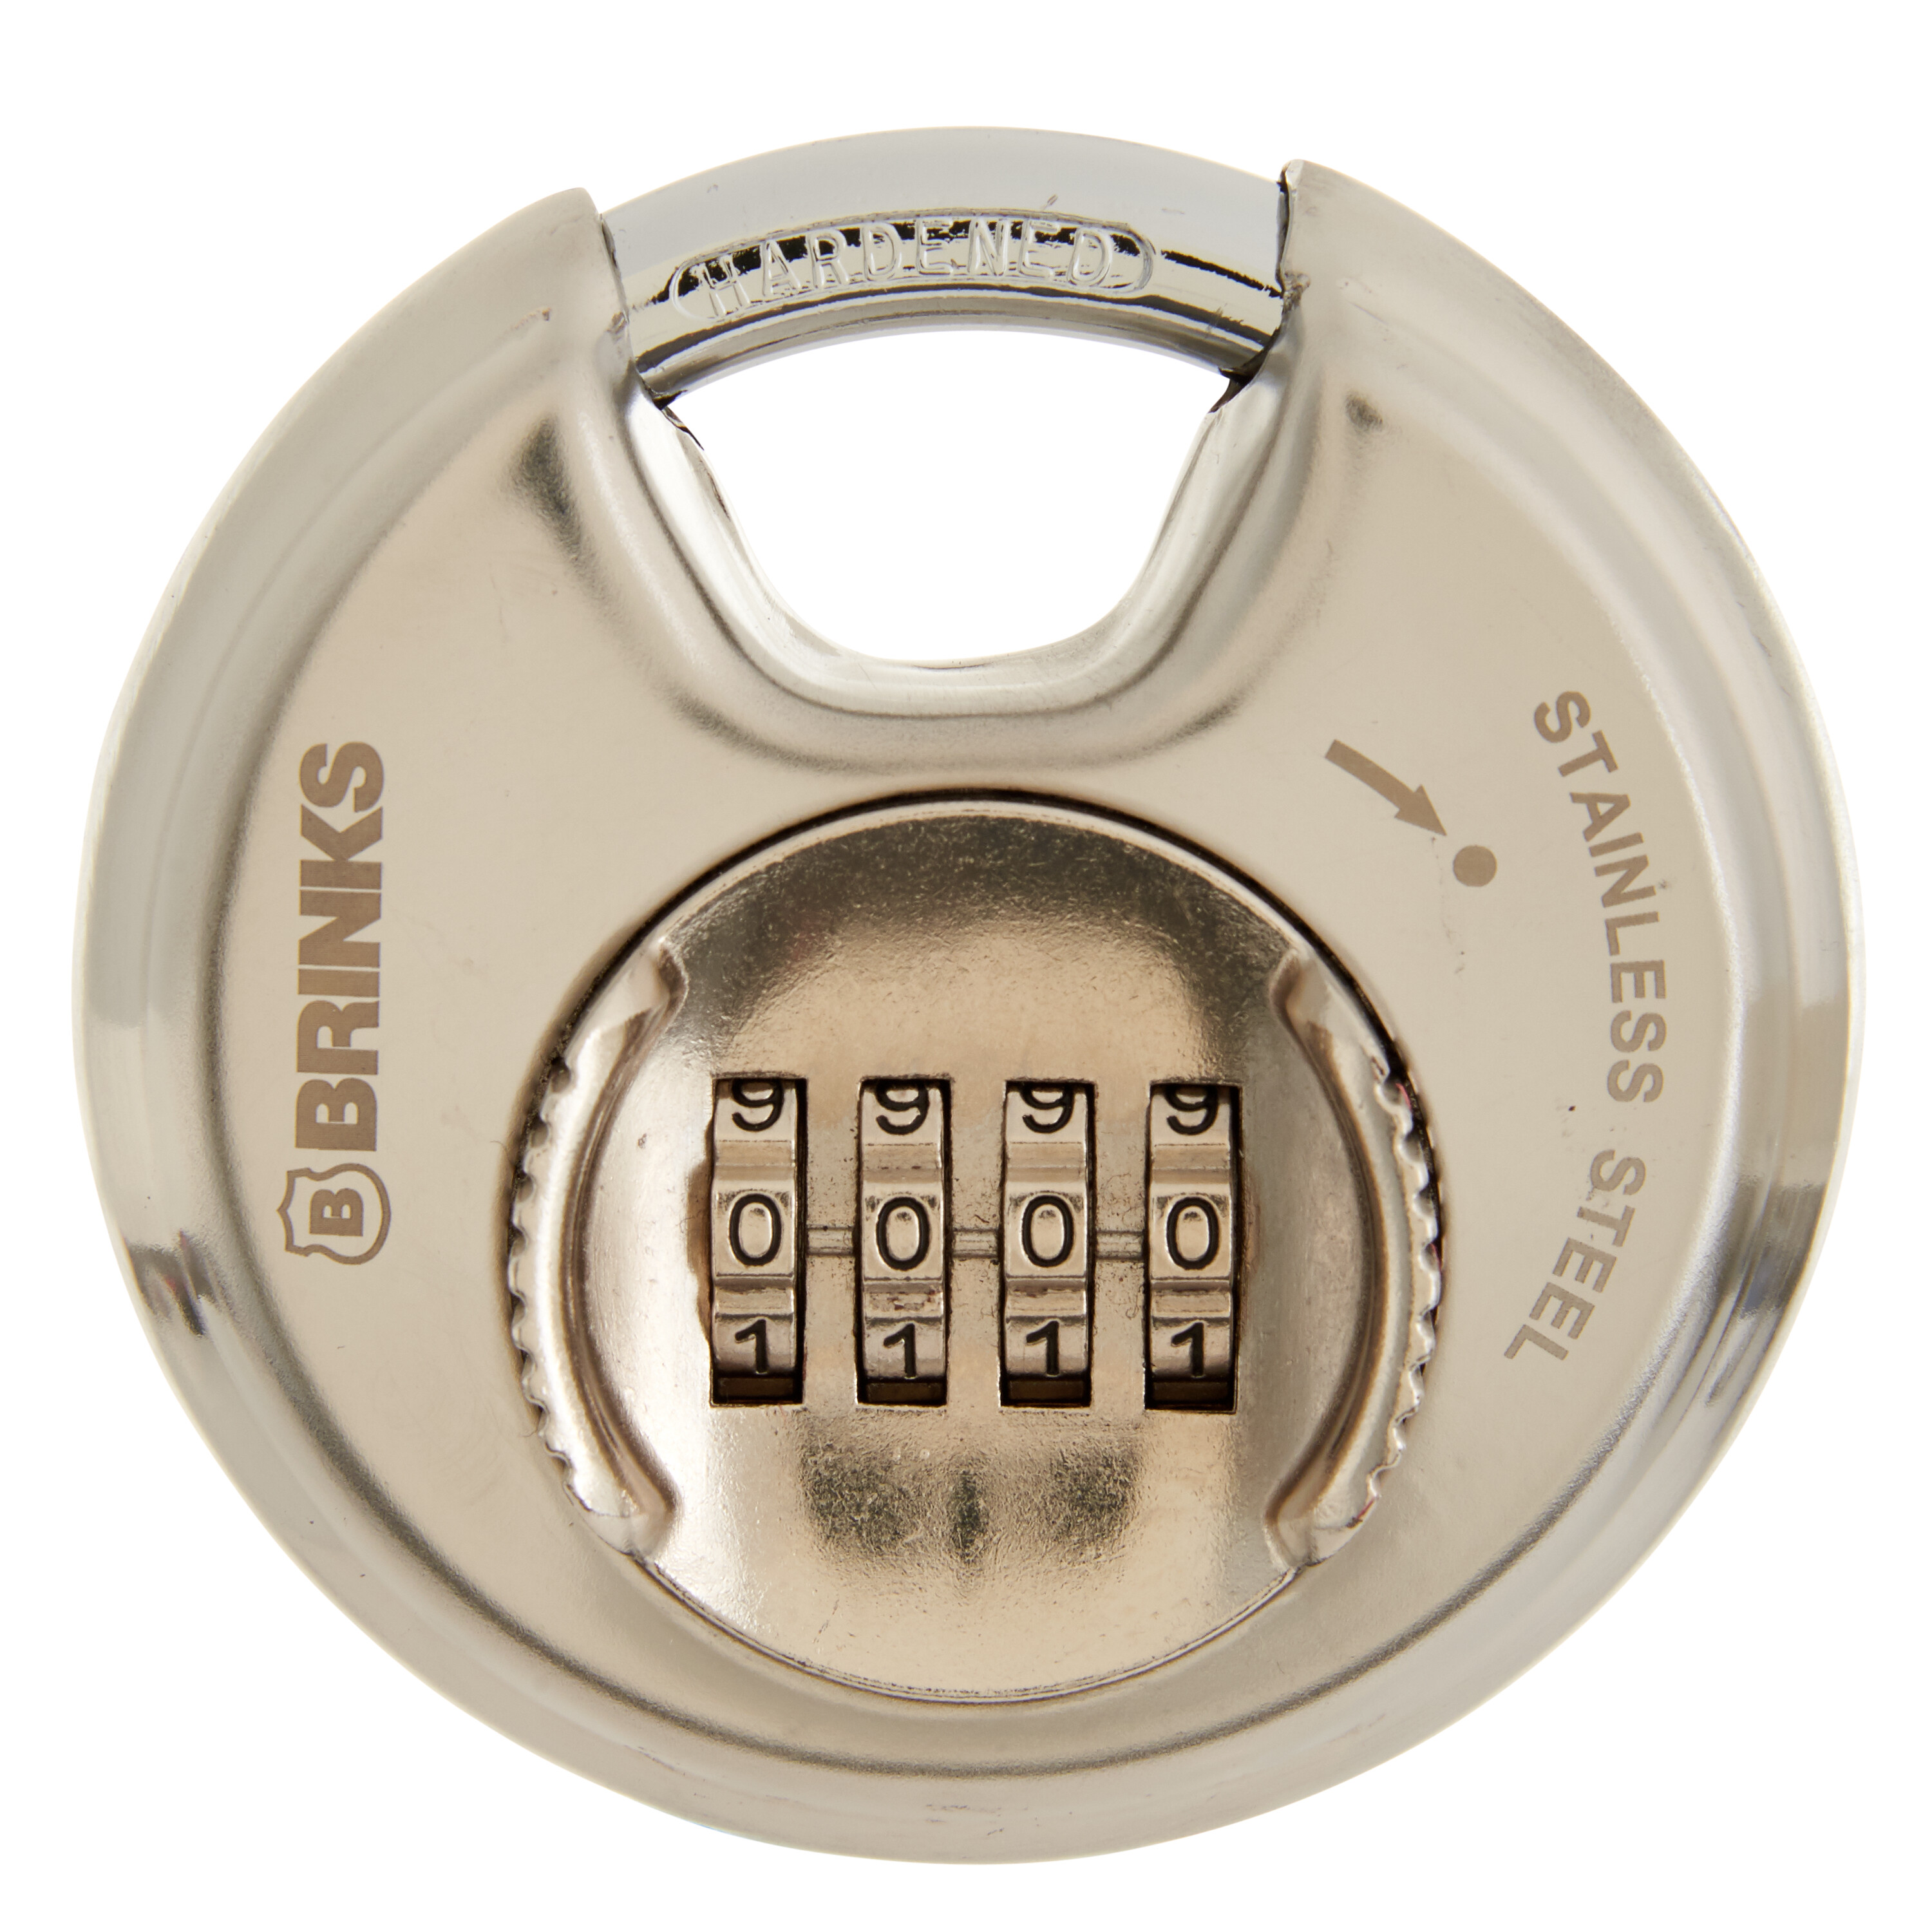 cant open my brinks combination lock